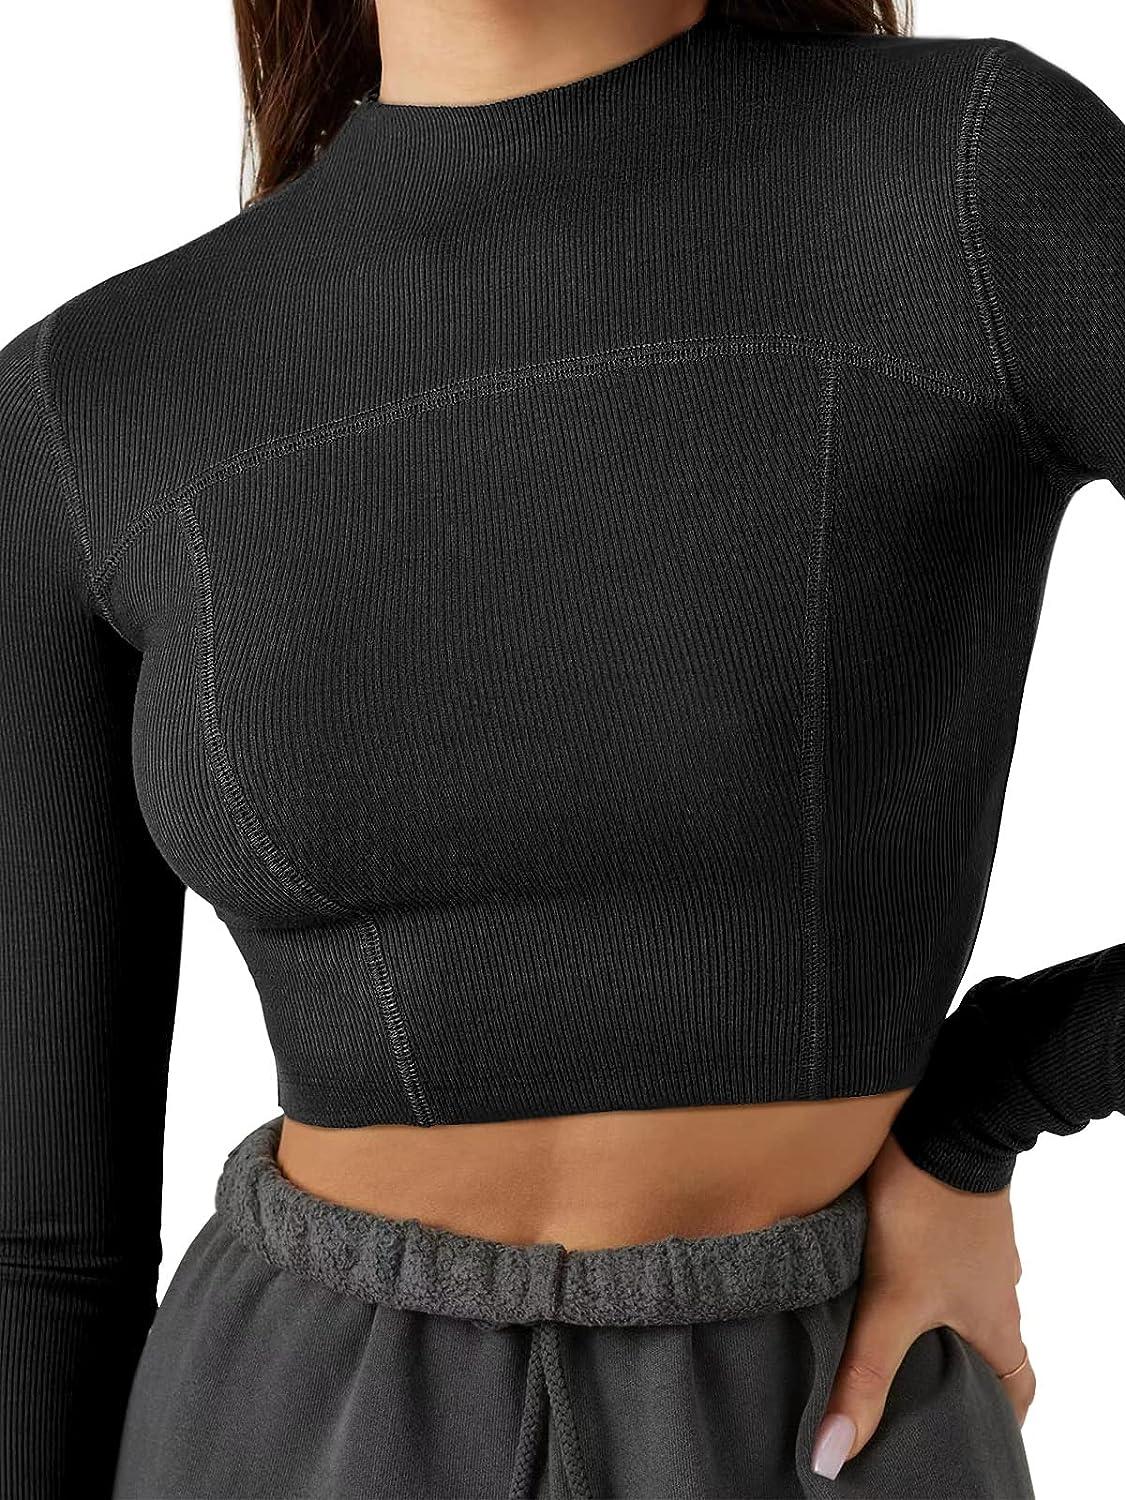 LASLULU Womens Seamless Workout Top Long Sleeve Ribbed Yoga Running Shirt  Cropped Athletic Shirts Slim Fit Crop Tops Black Small